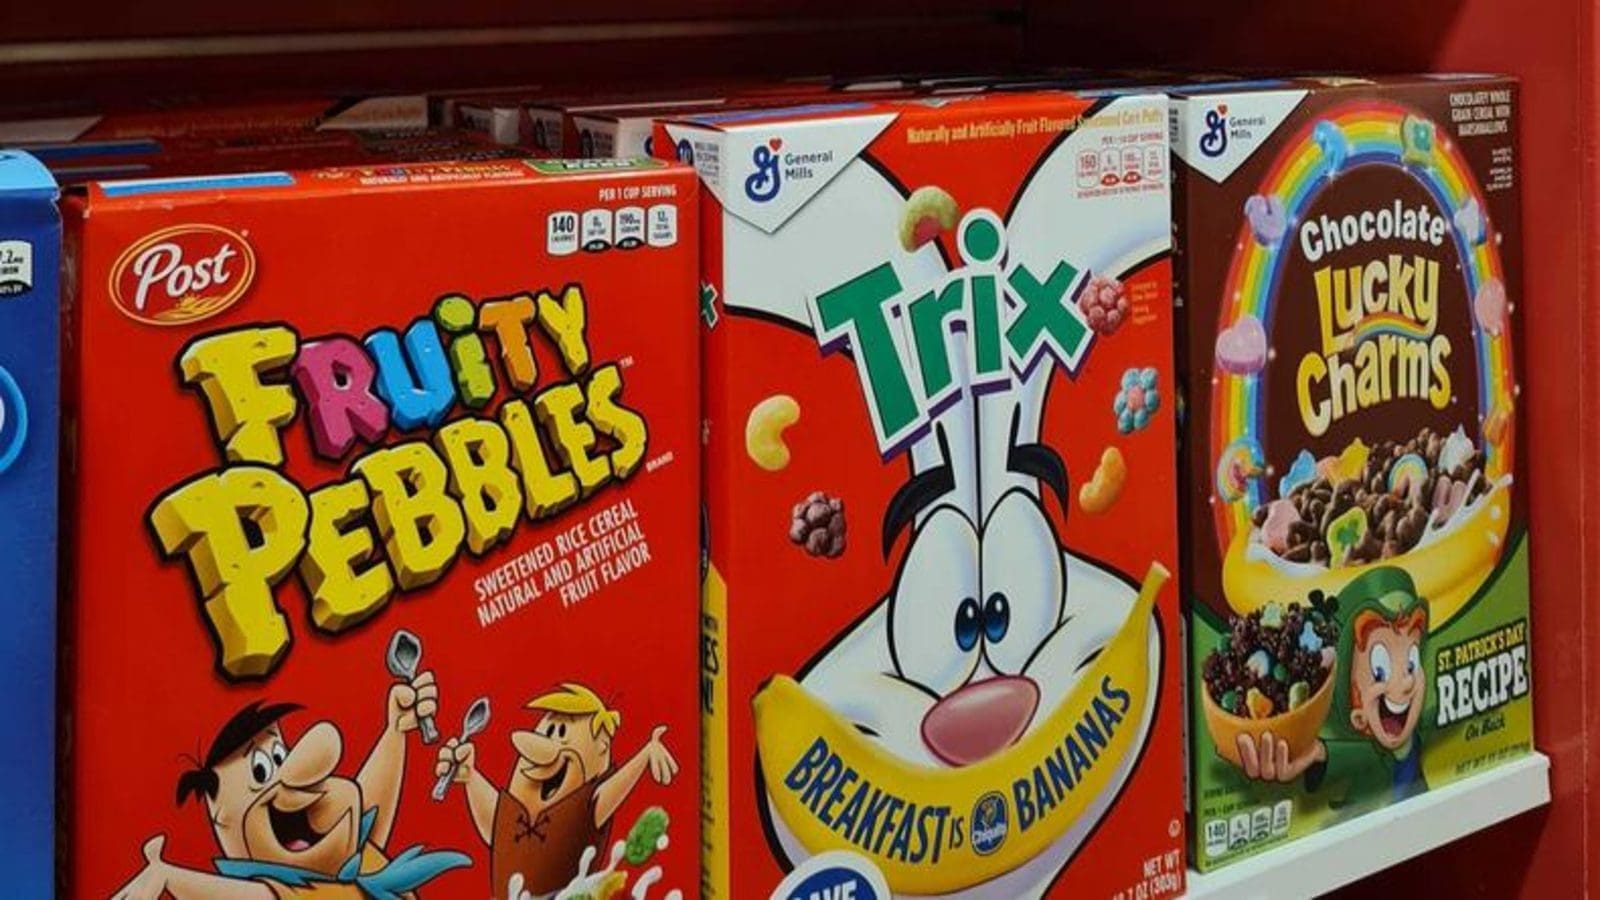 General Mills, Kellogg, Post Holdings oppose changes to “healthy” claims labeling in US